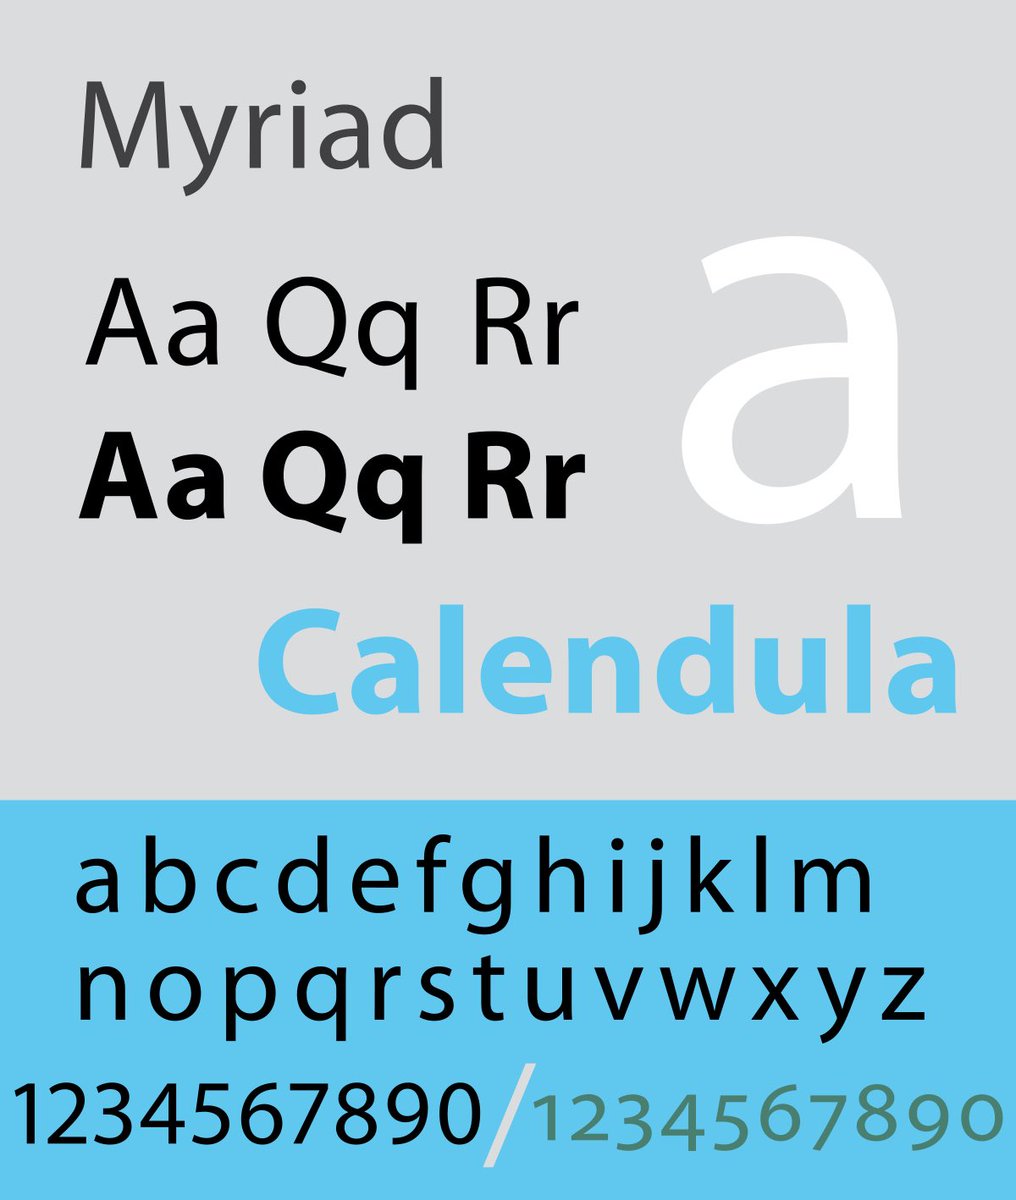 Myriad: a default font in adobe, so i i’ve always hated it for no reason and always excited to change it.